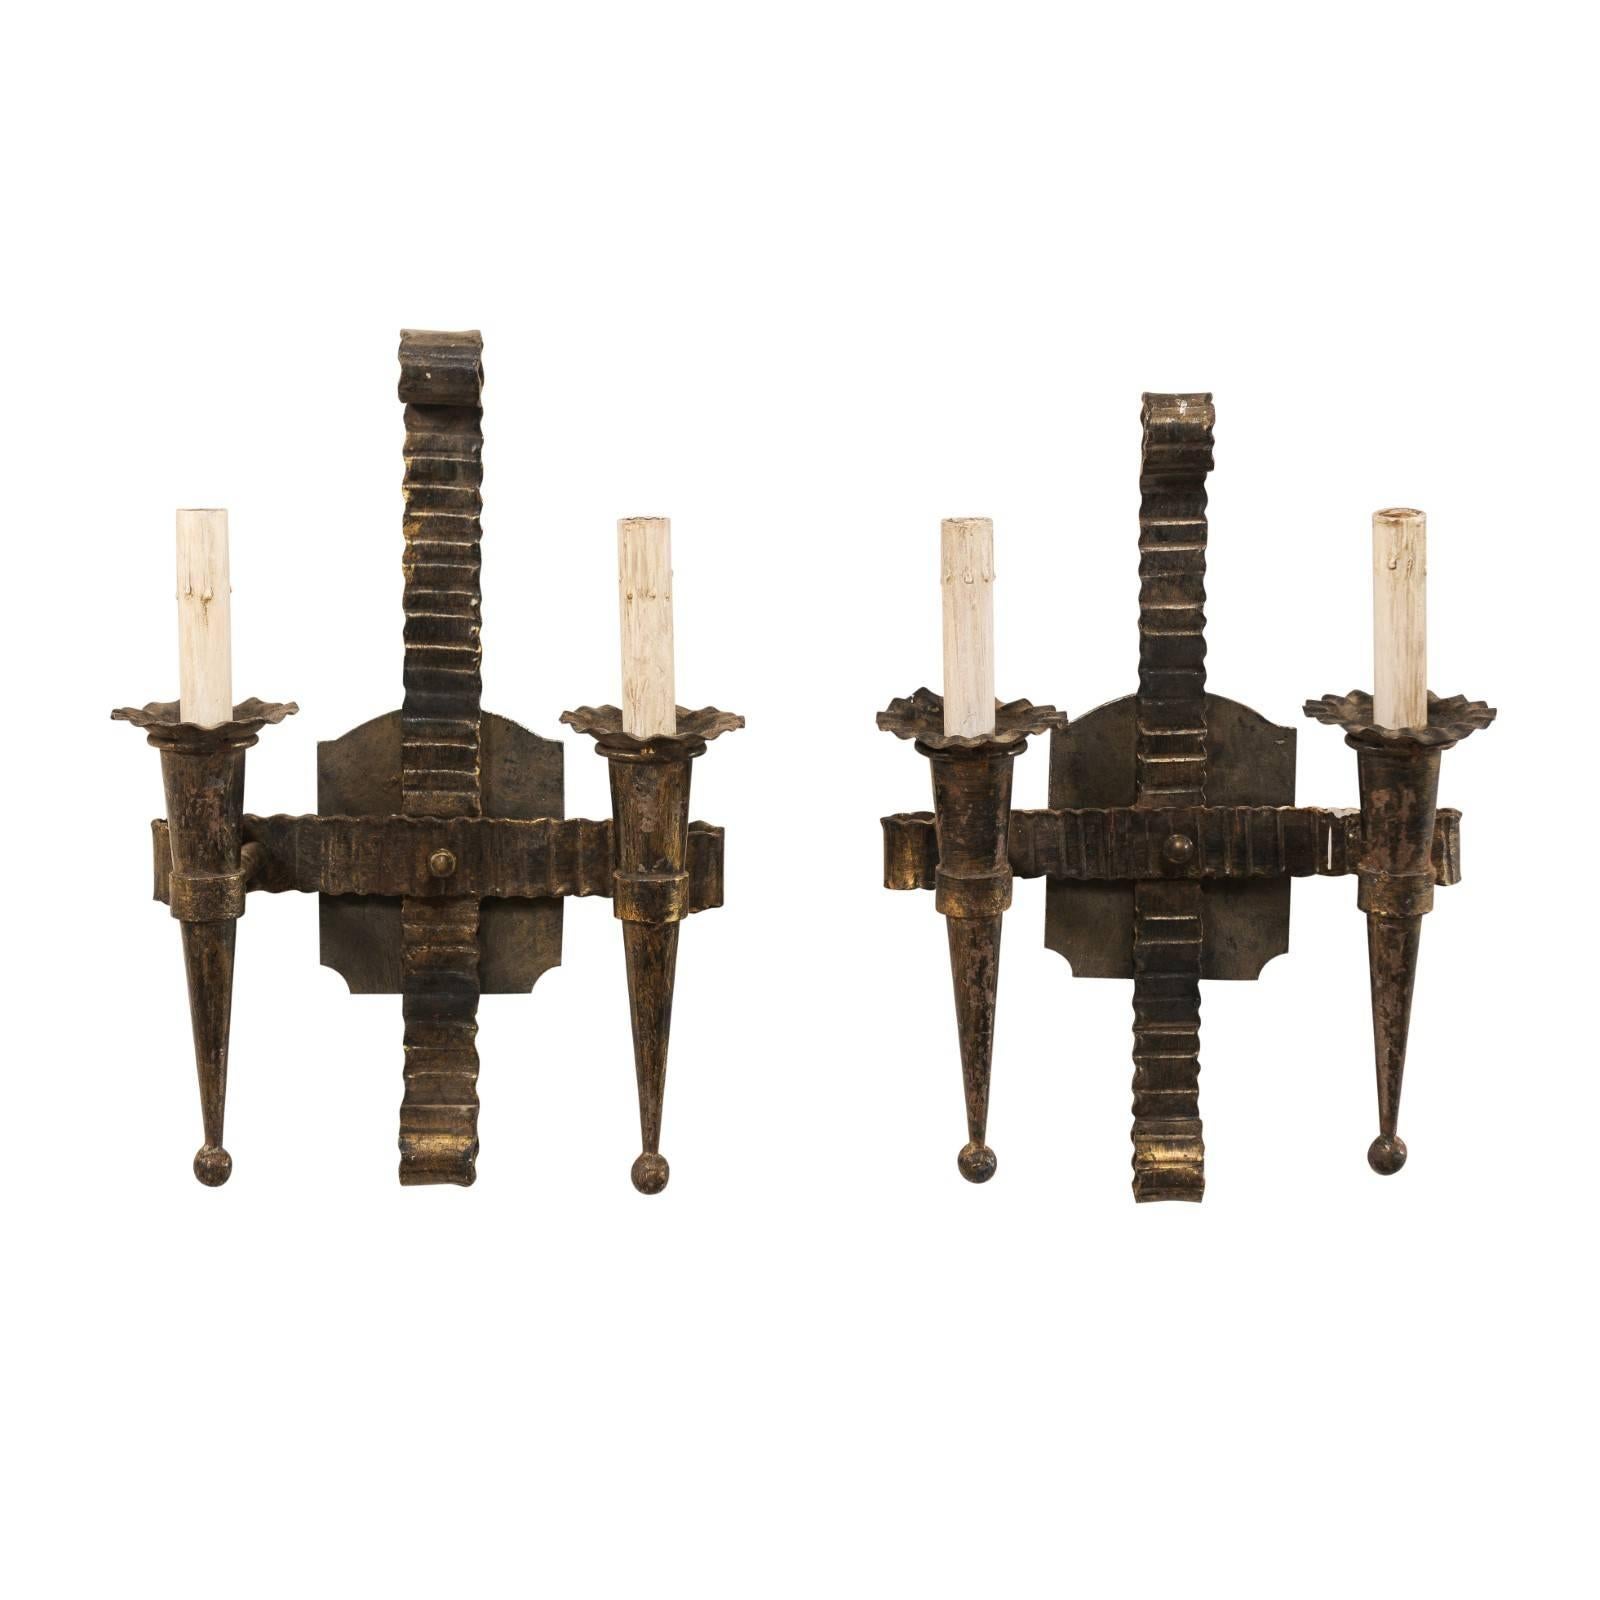 Pair of French Two-Light Hand-Forged Iron Mid-Century Sconces with Torch Shapes